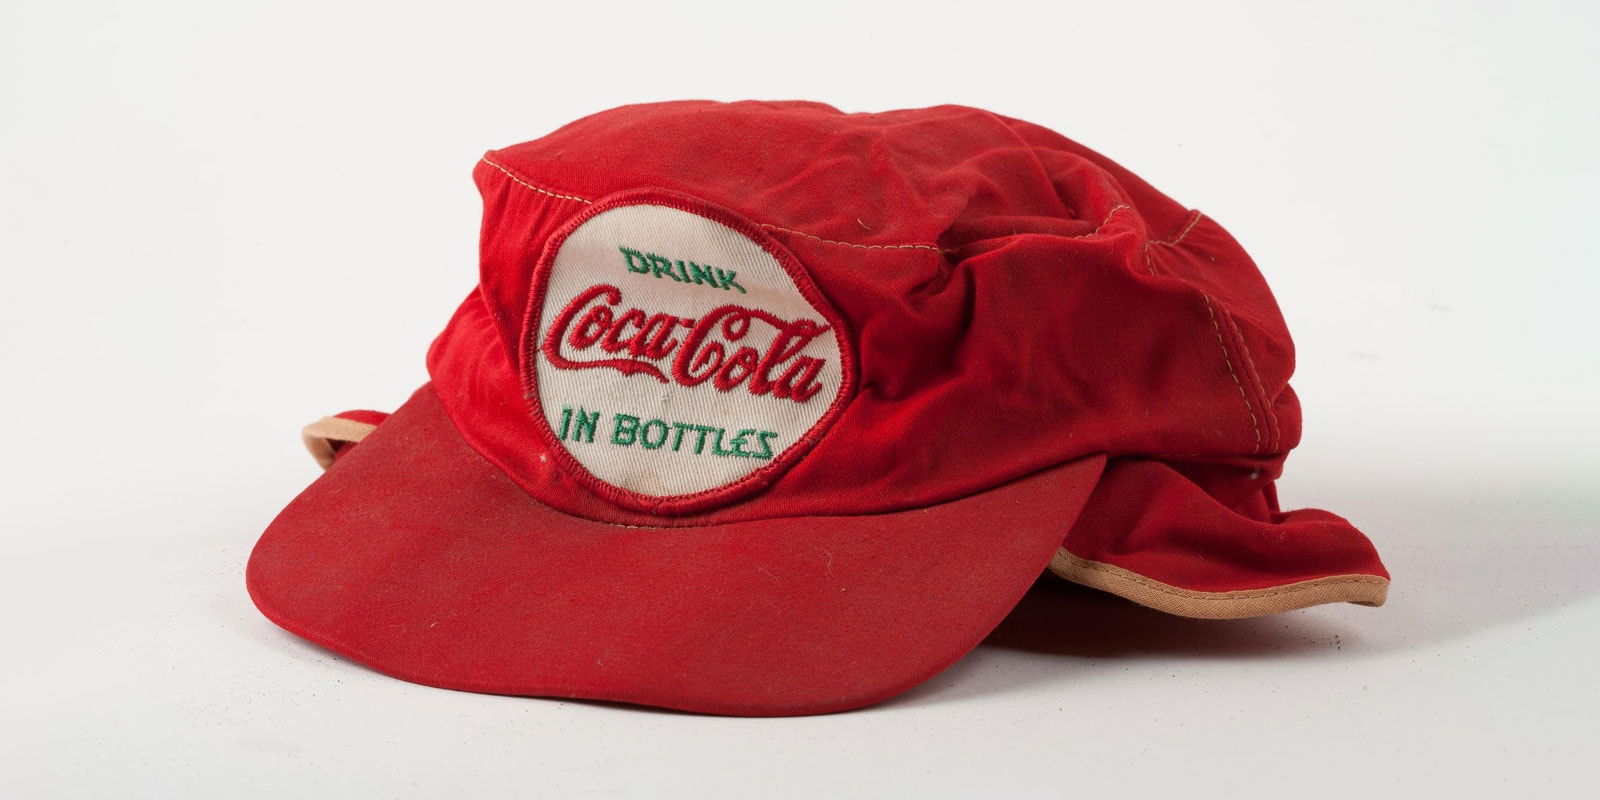 Coca-Cola Head of Fashion Licensing Interview kate dwyer global feature 